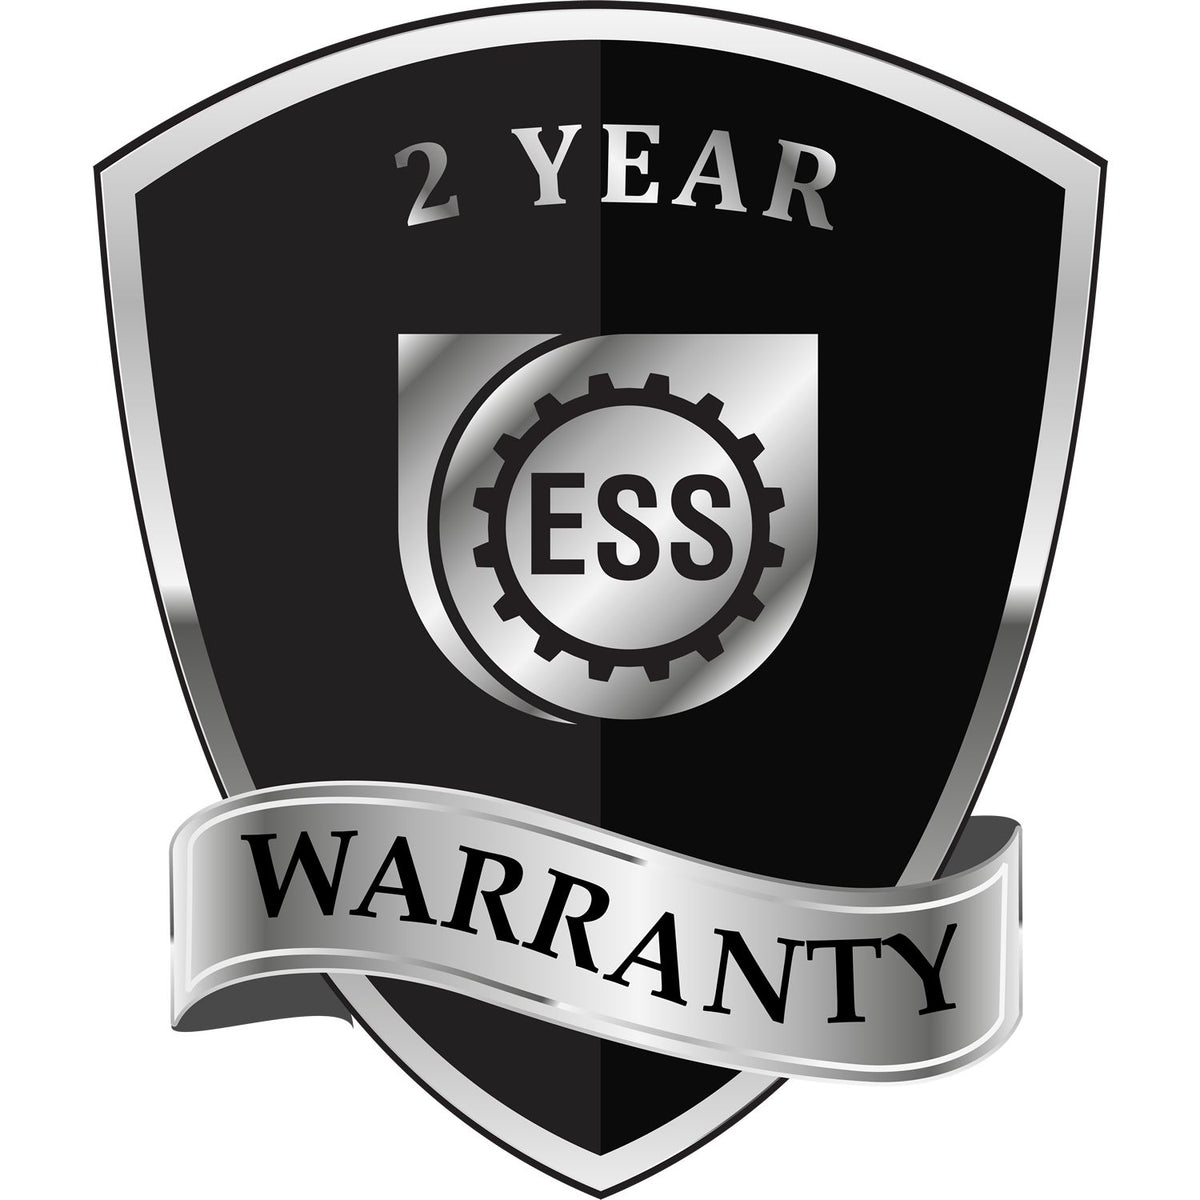 A black and silver badge or emblem showing warranty information for the Gift Maryland Landscape Architect Seal